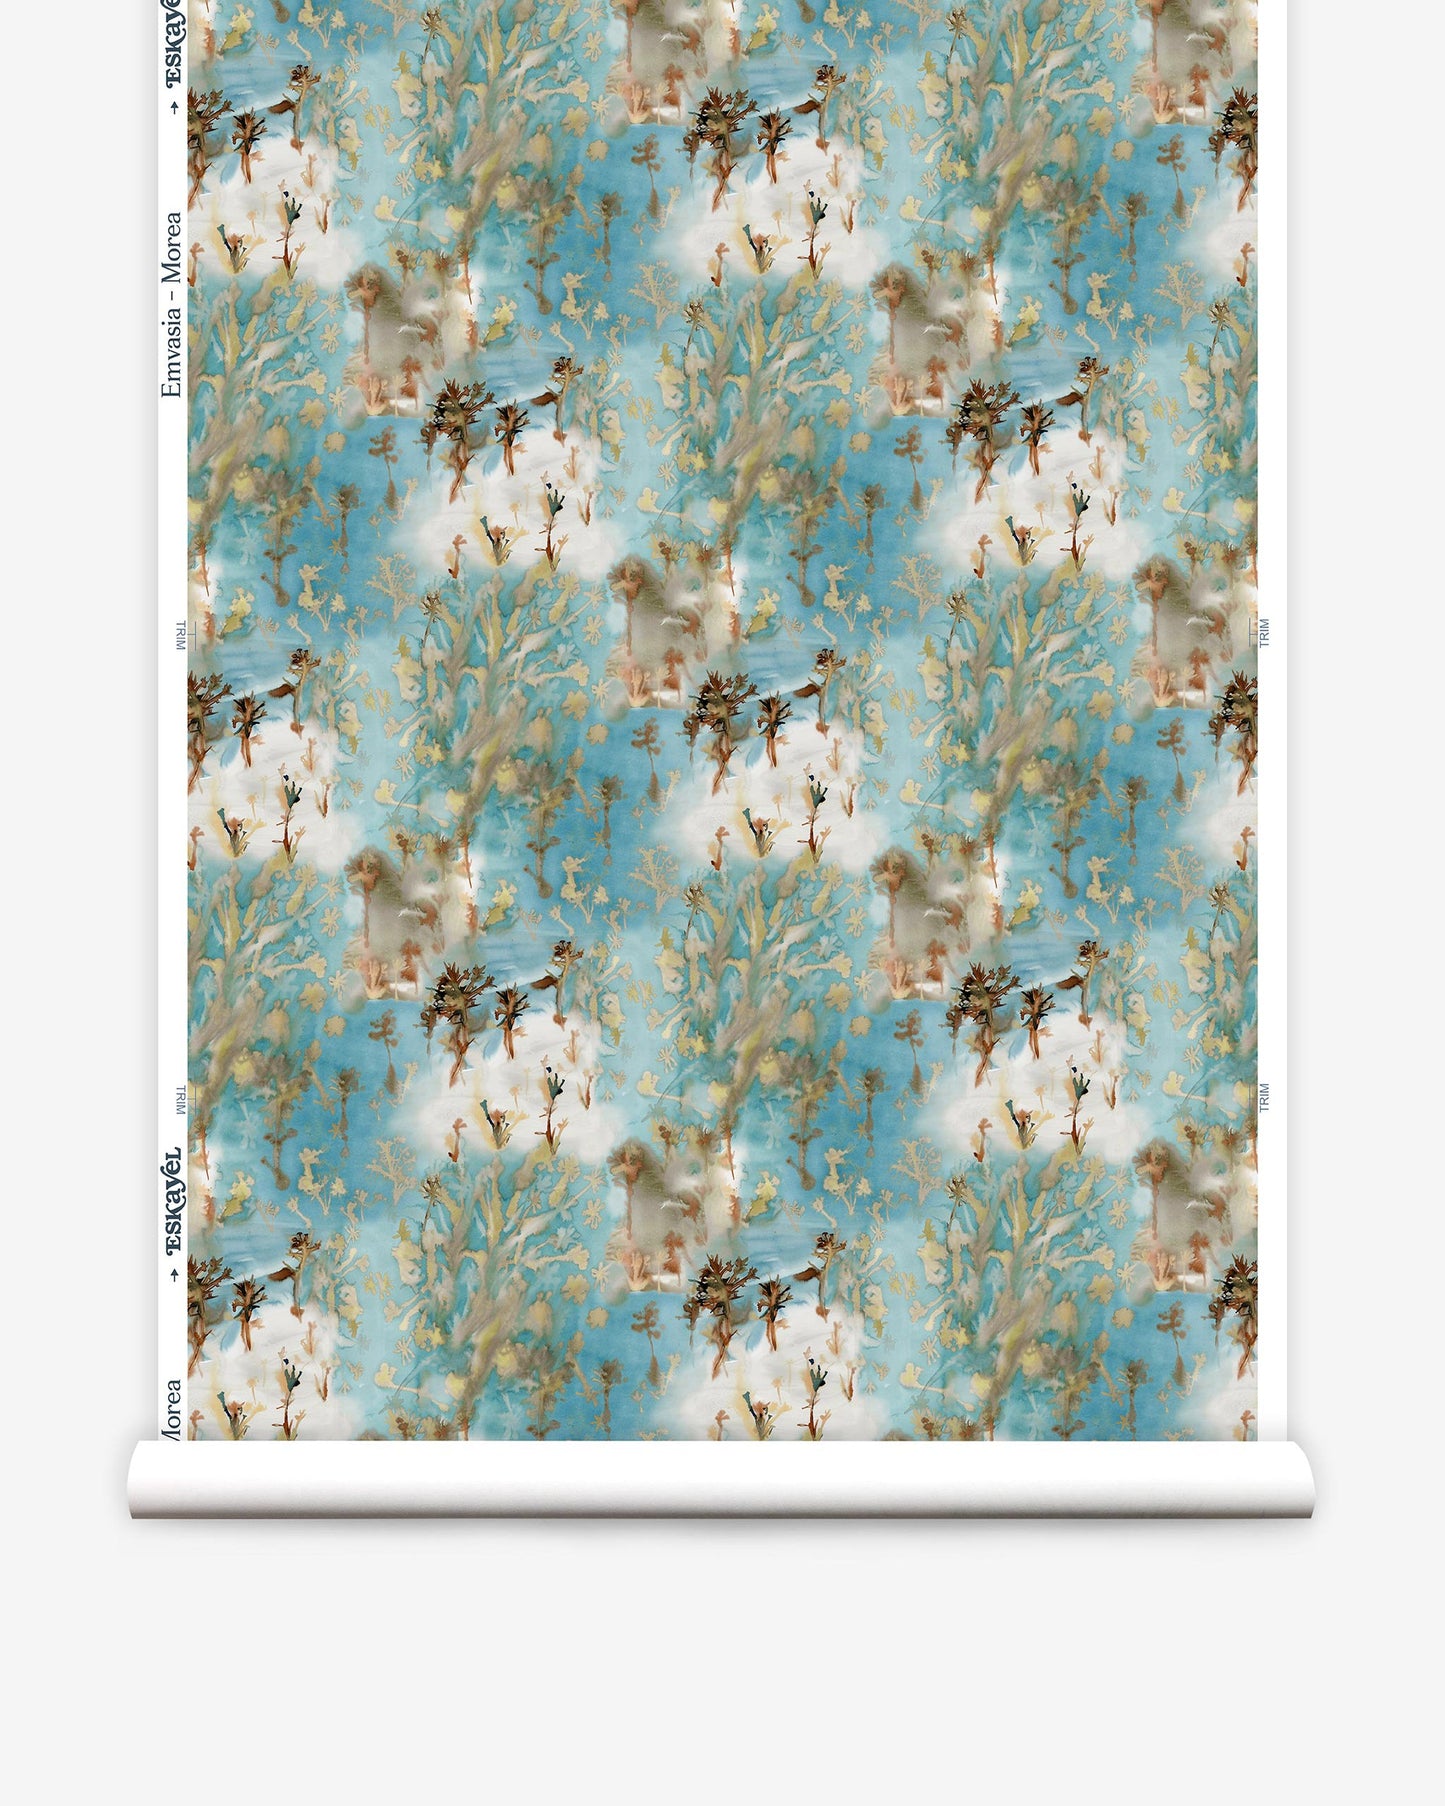 A blue and brown Emvasia Wallpaper||Morea with birds on it.